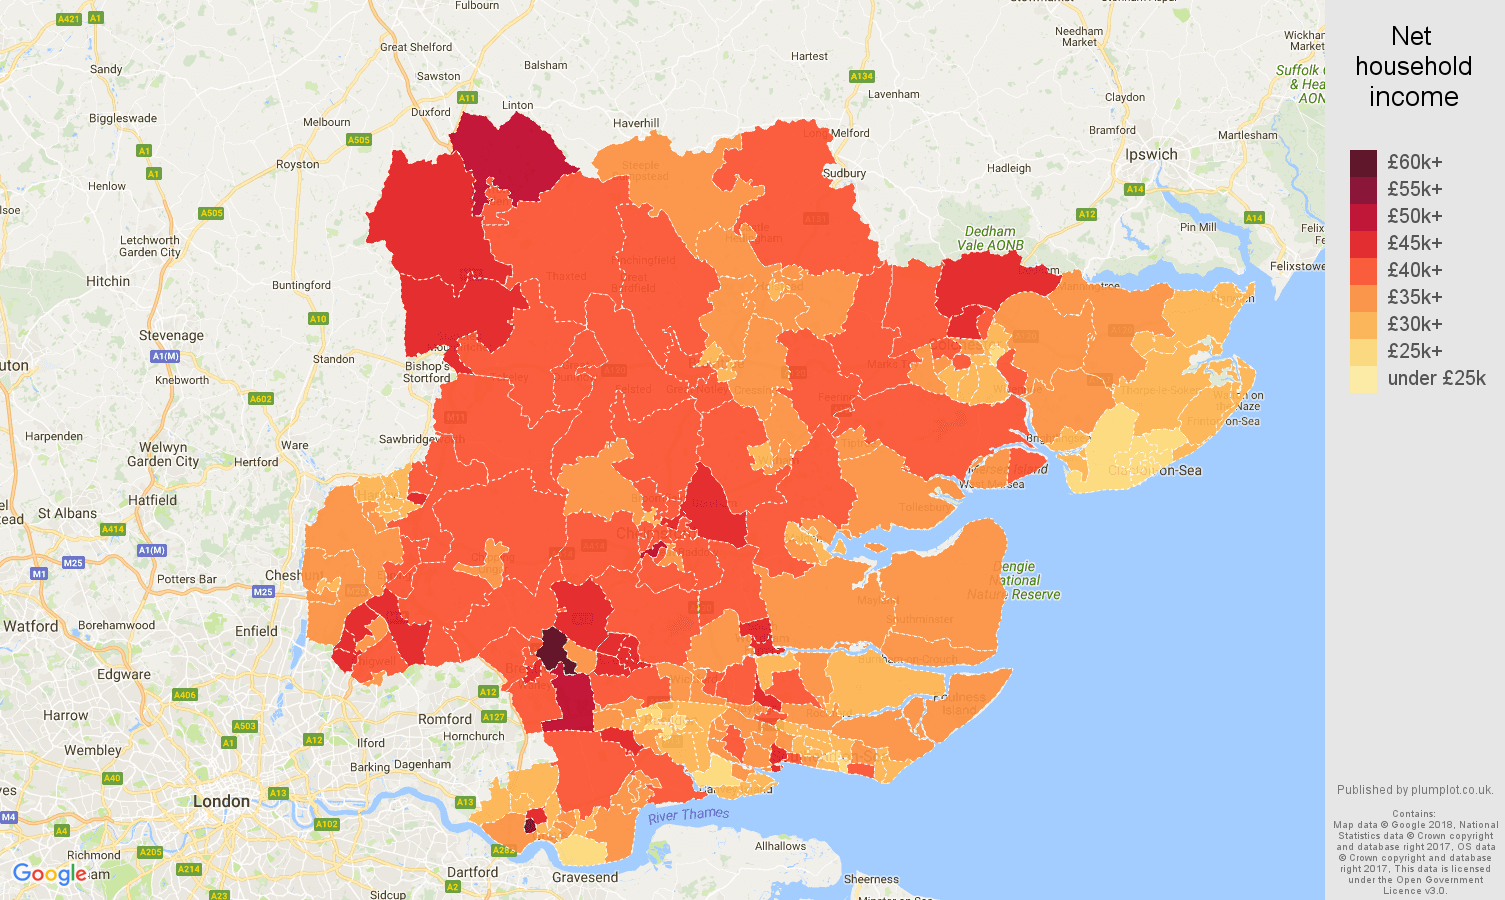 Essex net household income map